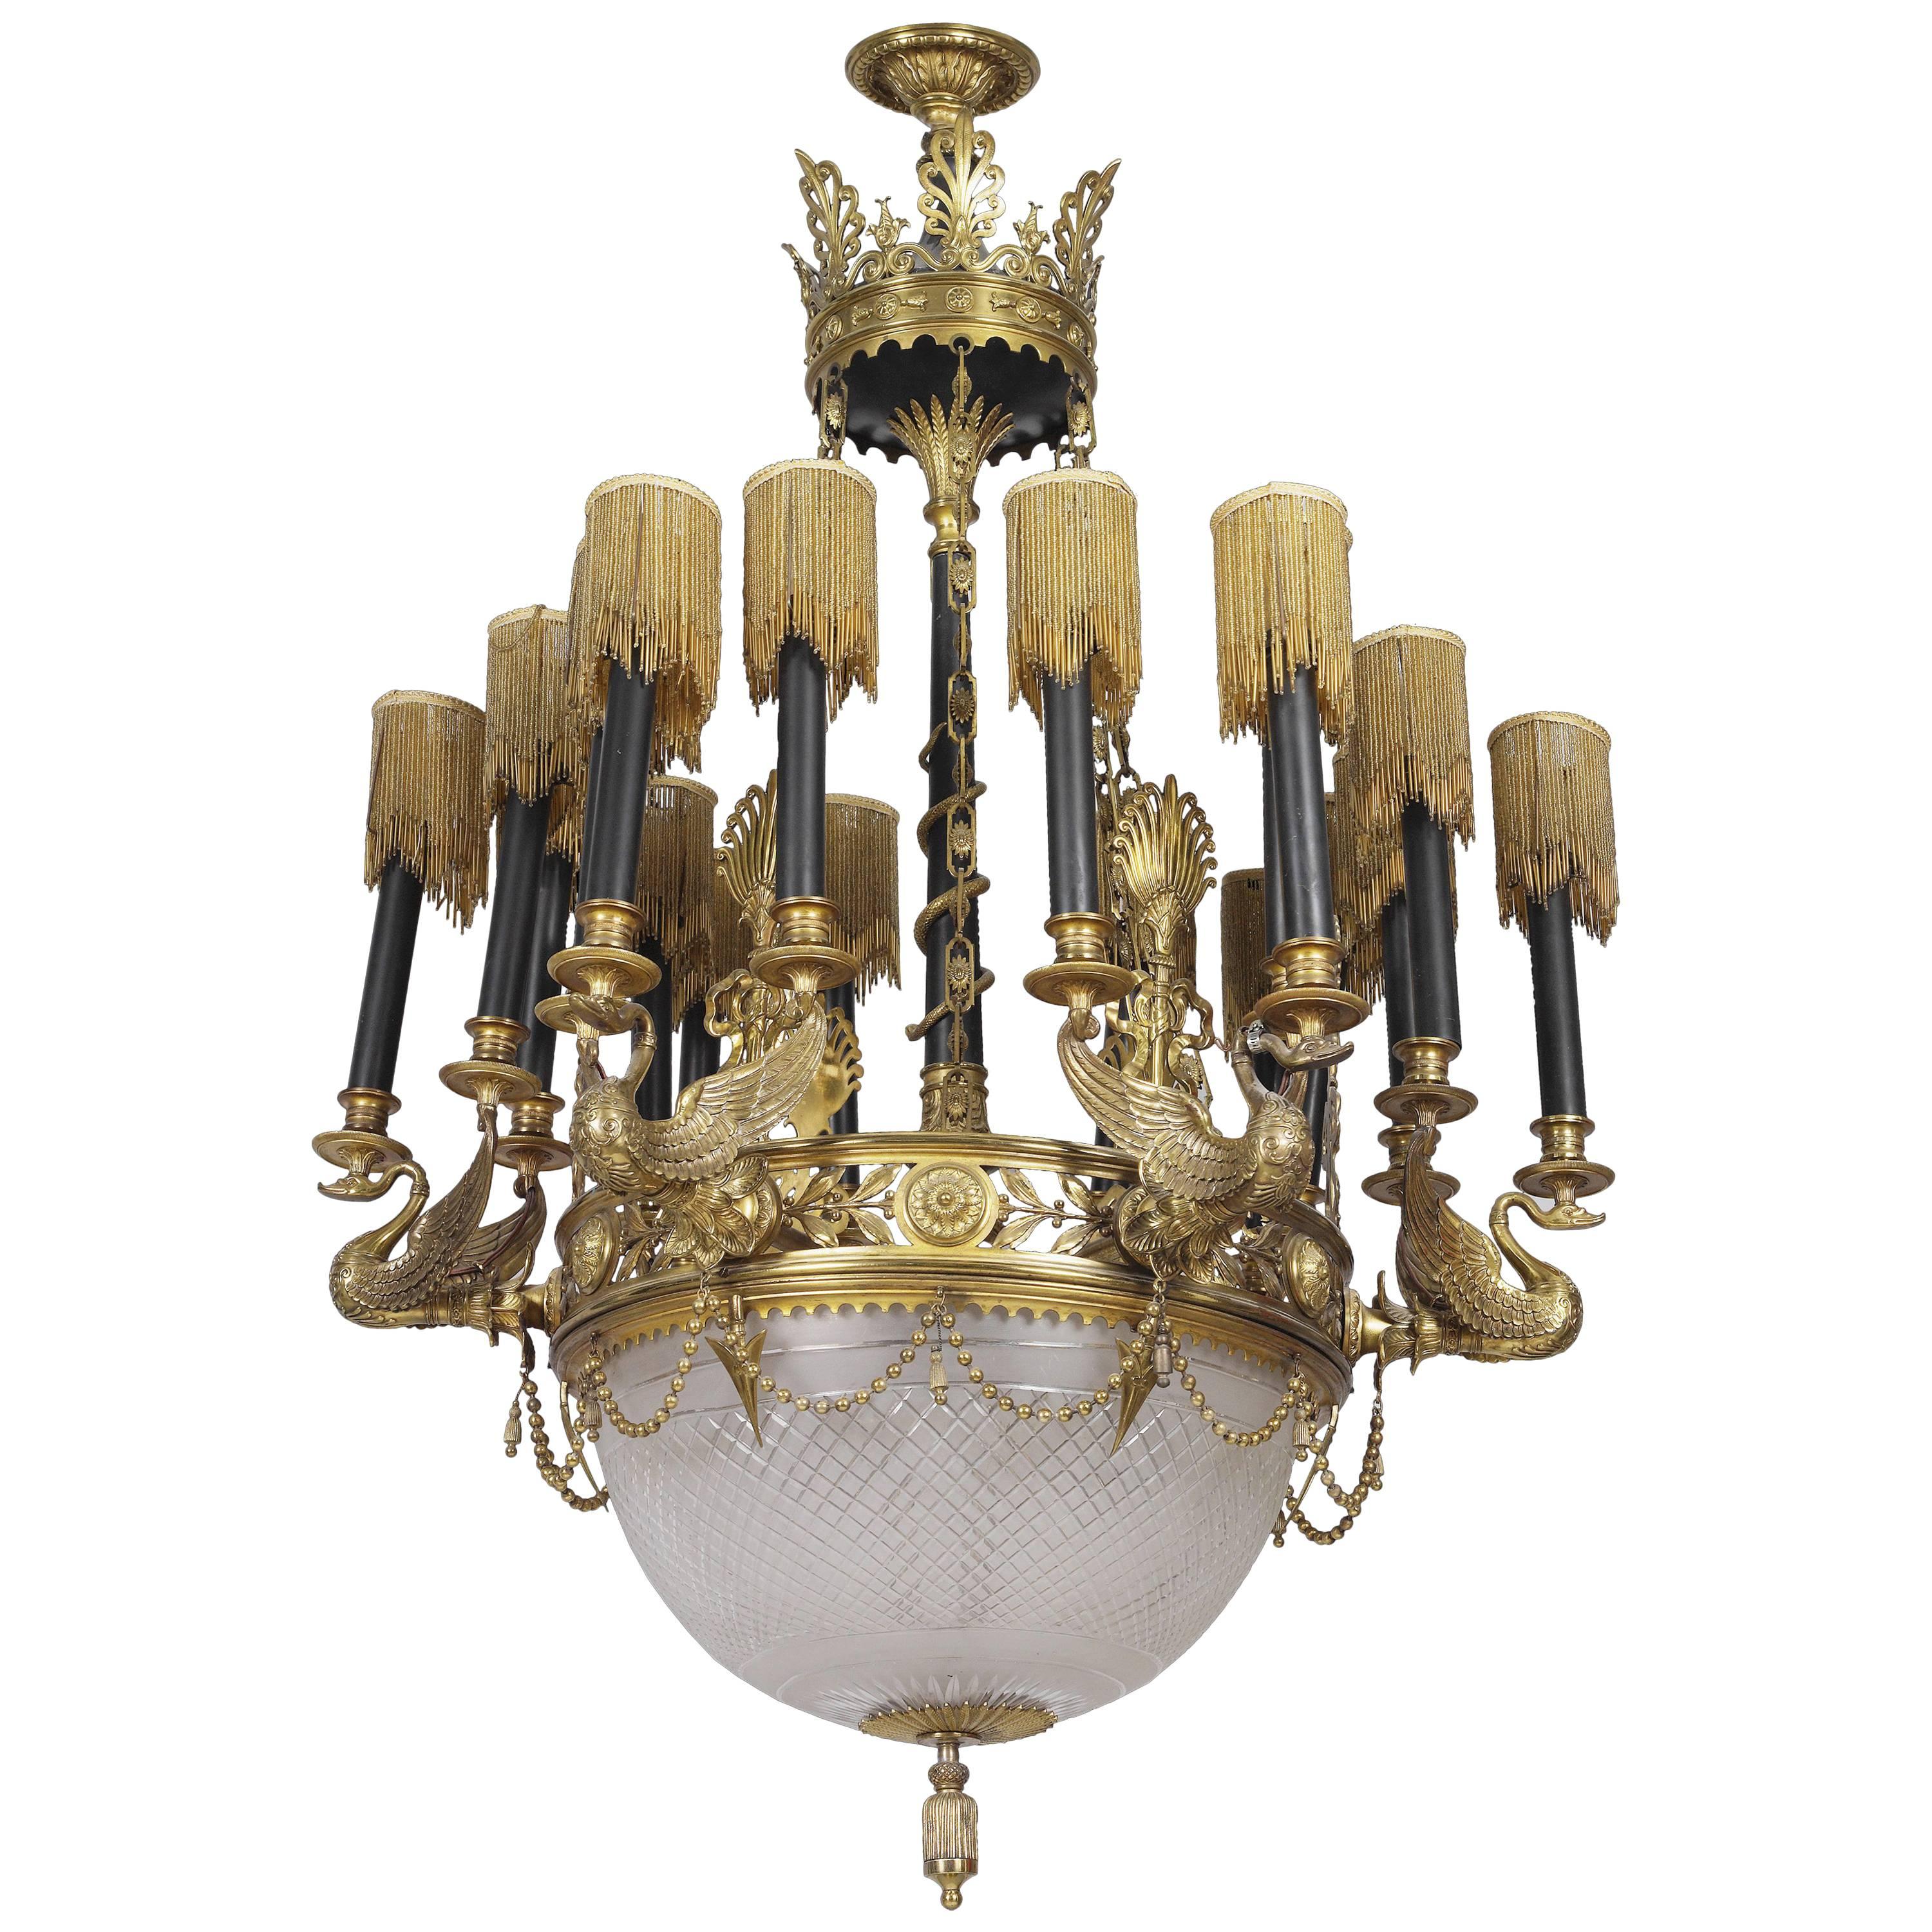 Large Empire style cut glass, gilt and patinated bronze French chandelier